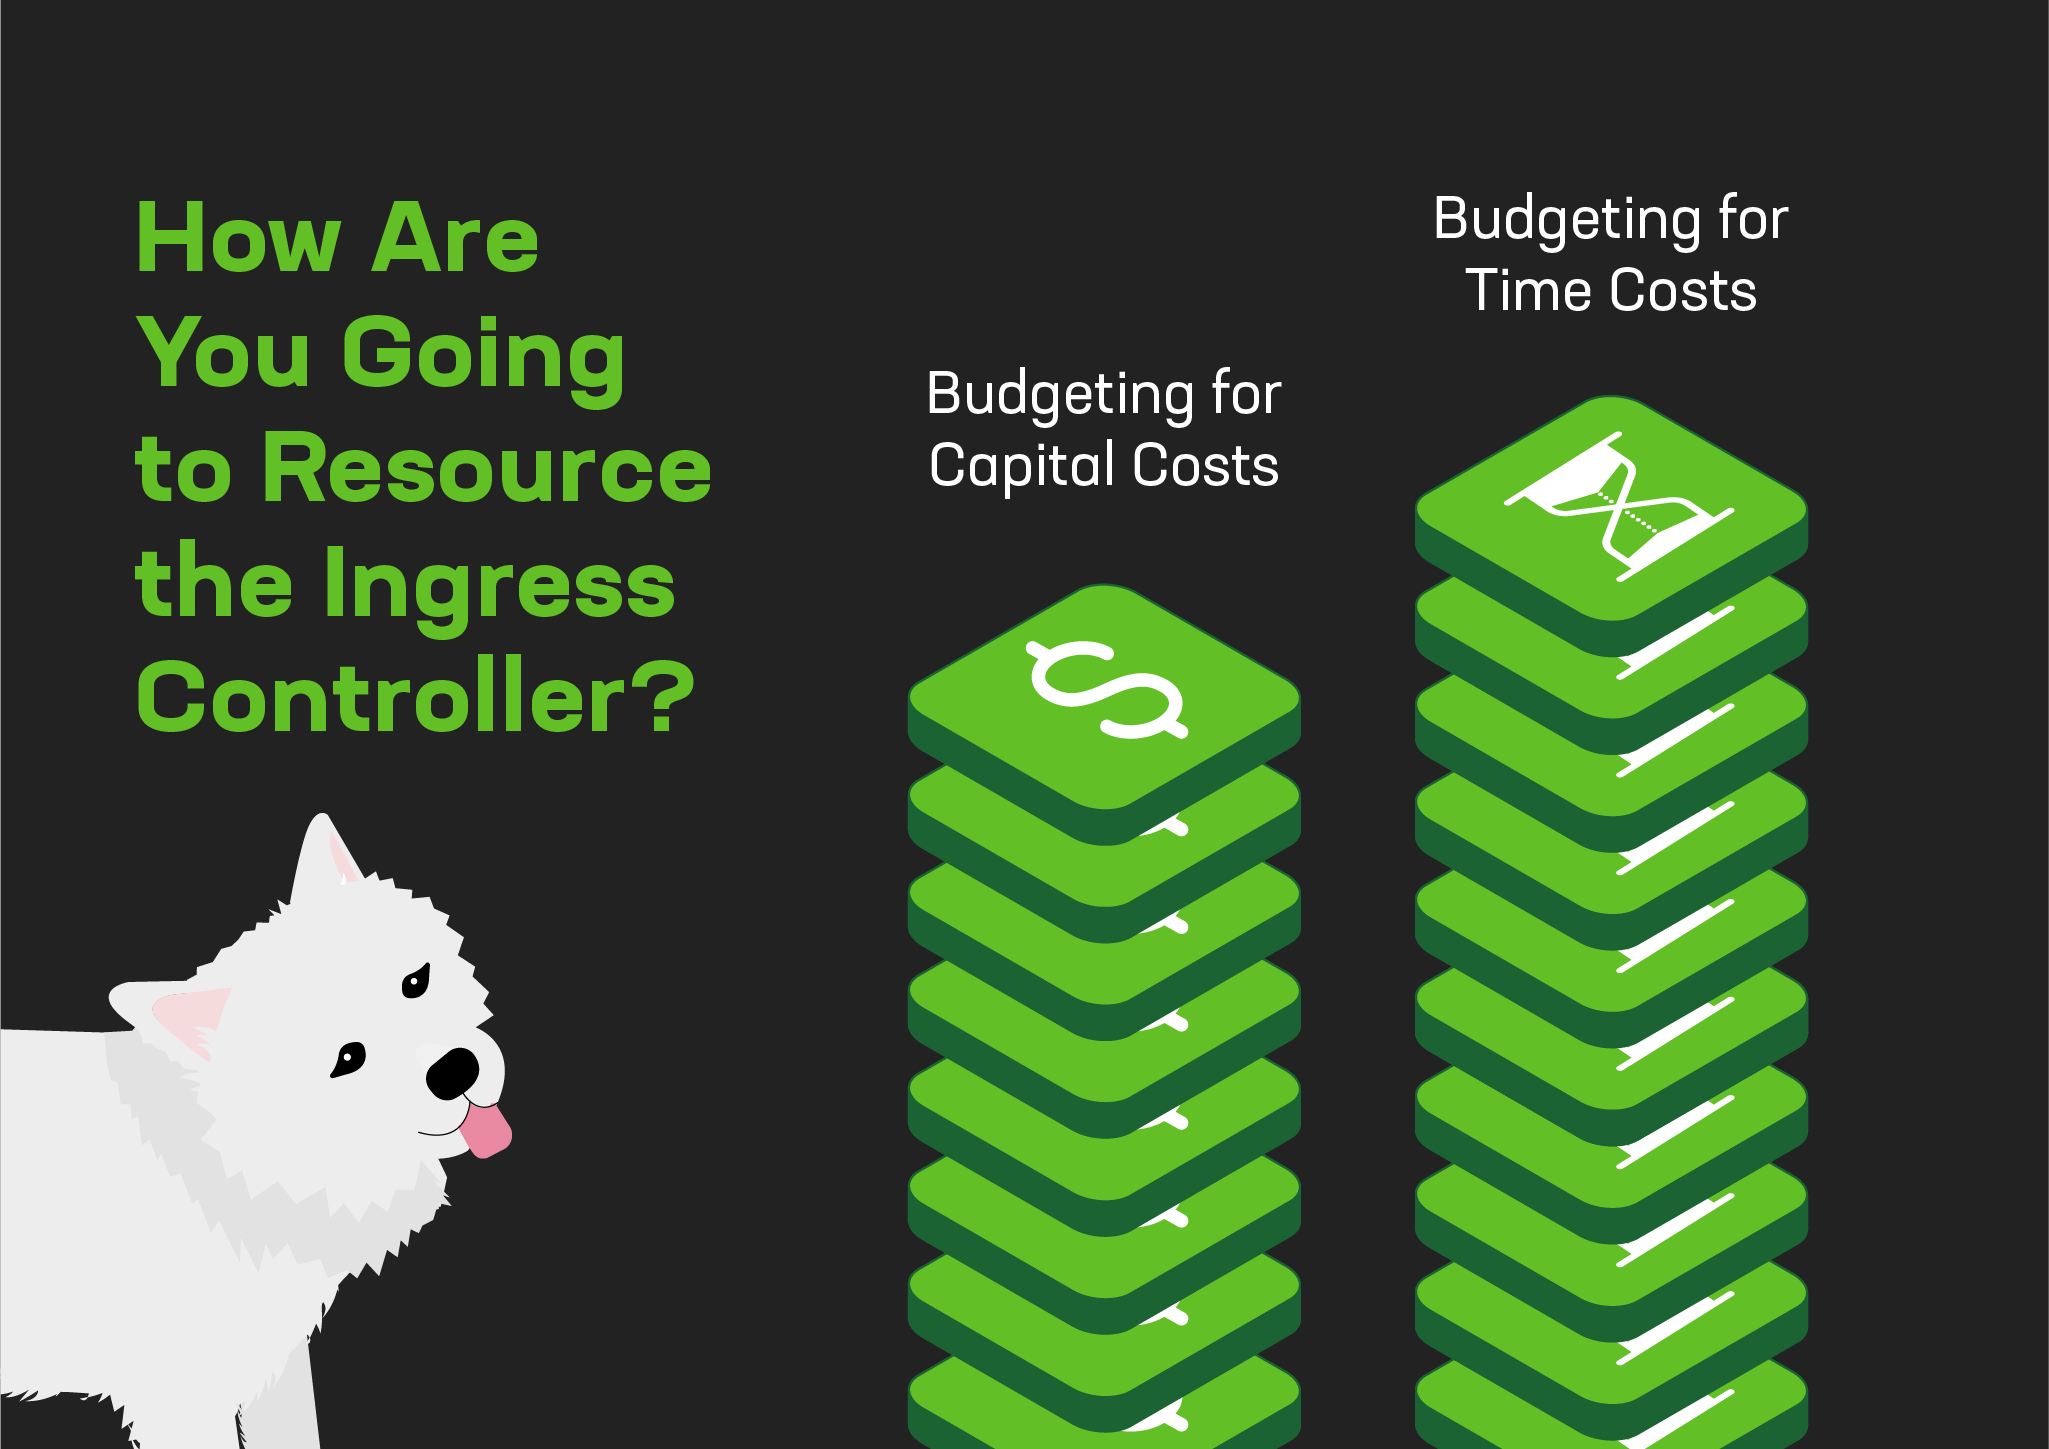 Resource the Ingress Controller by budgeting for capital costs or time costs